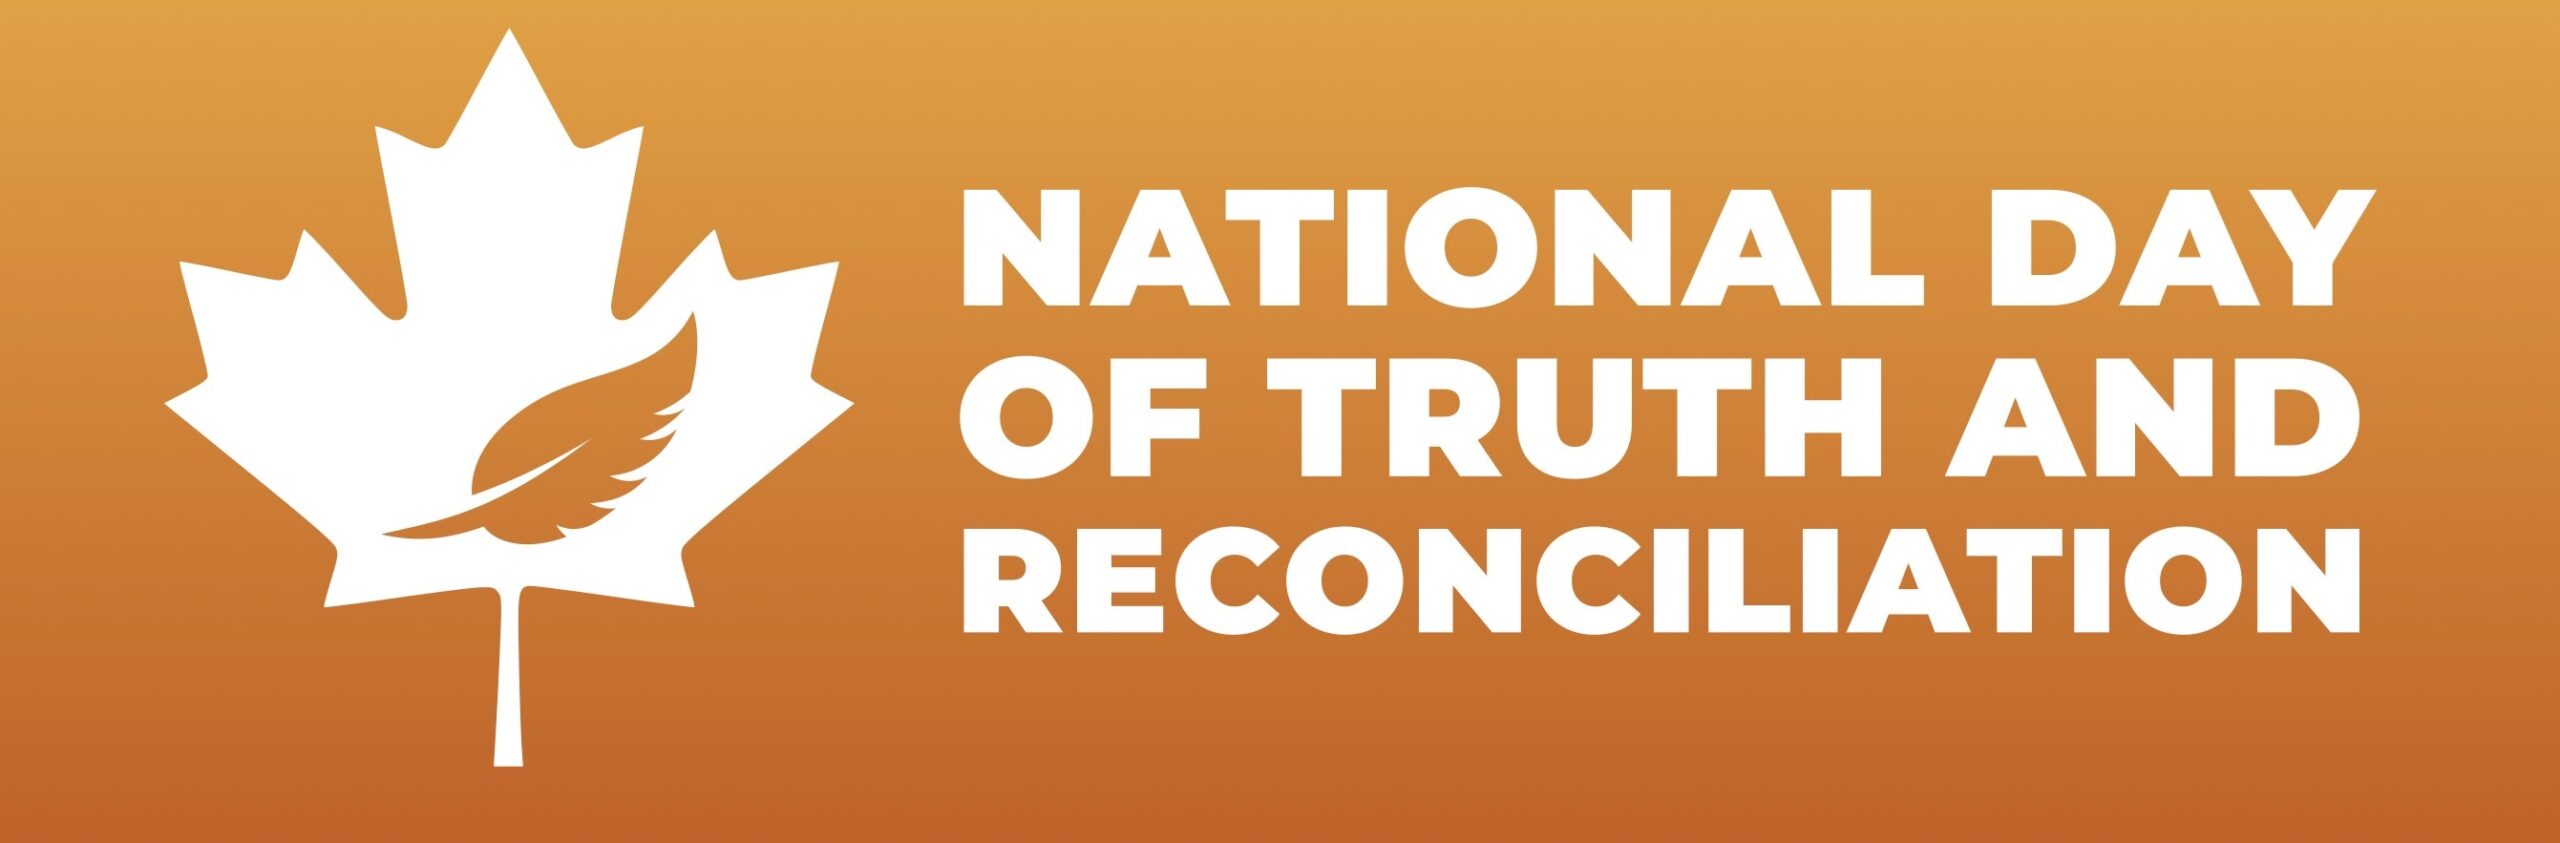 National Day of Truth and Reconciliation The ICBA Independent